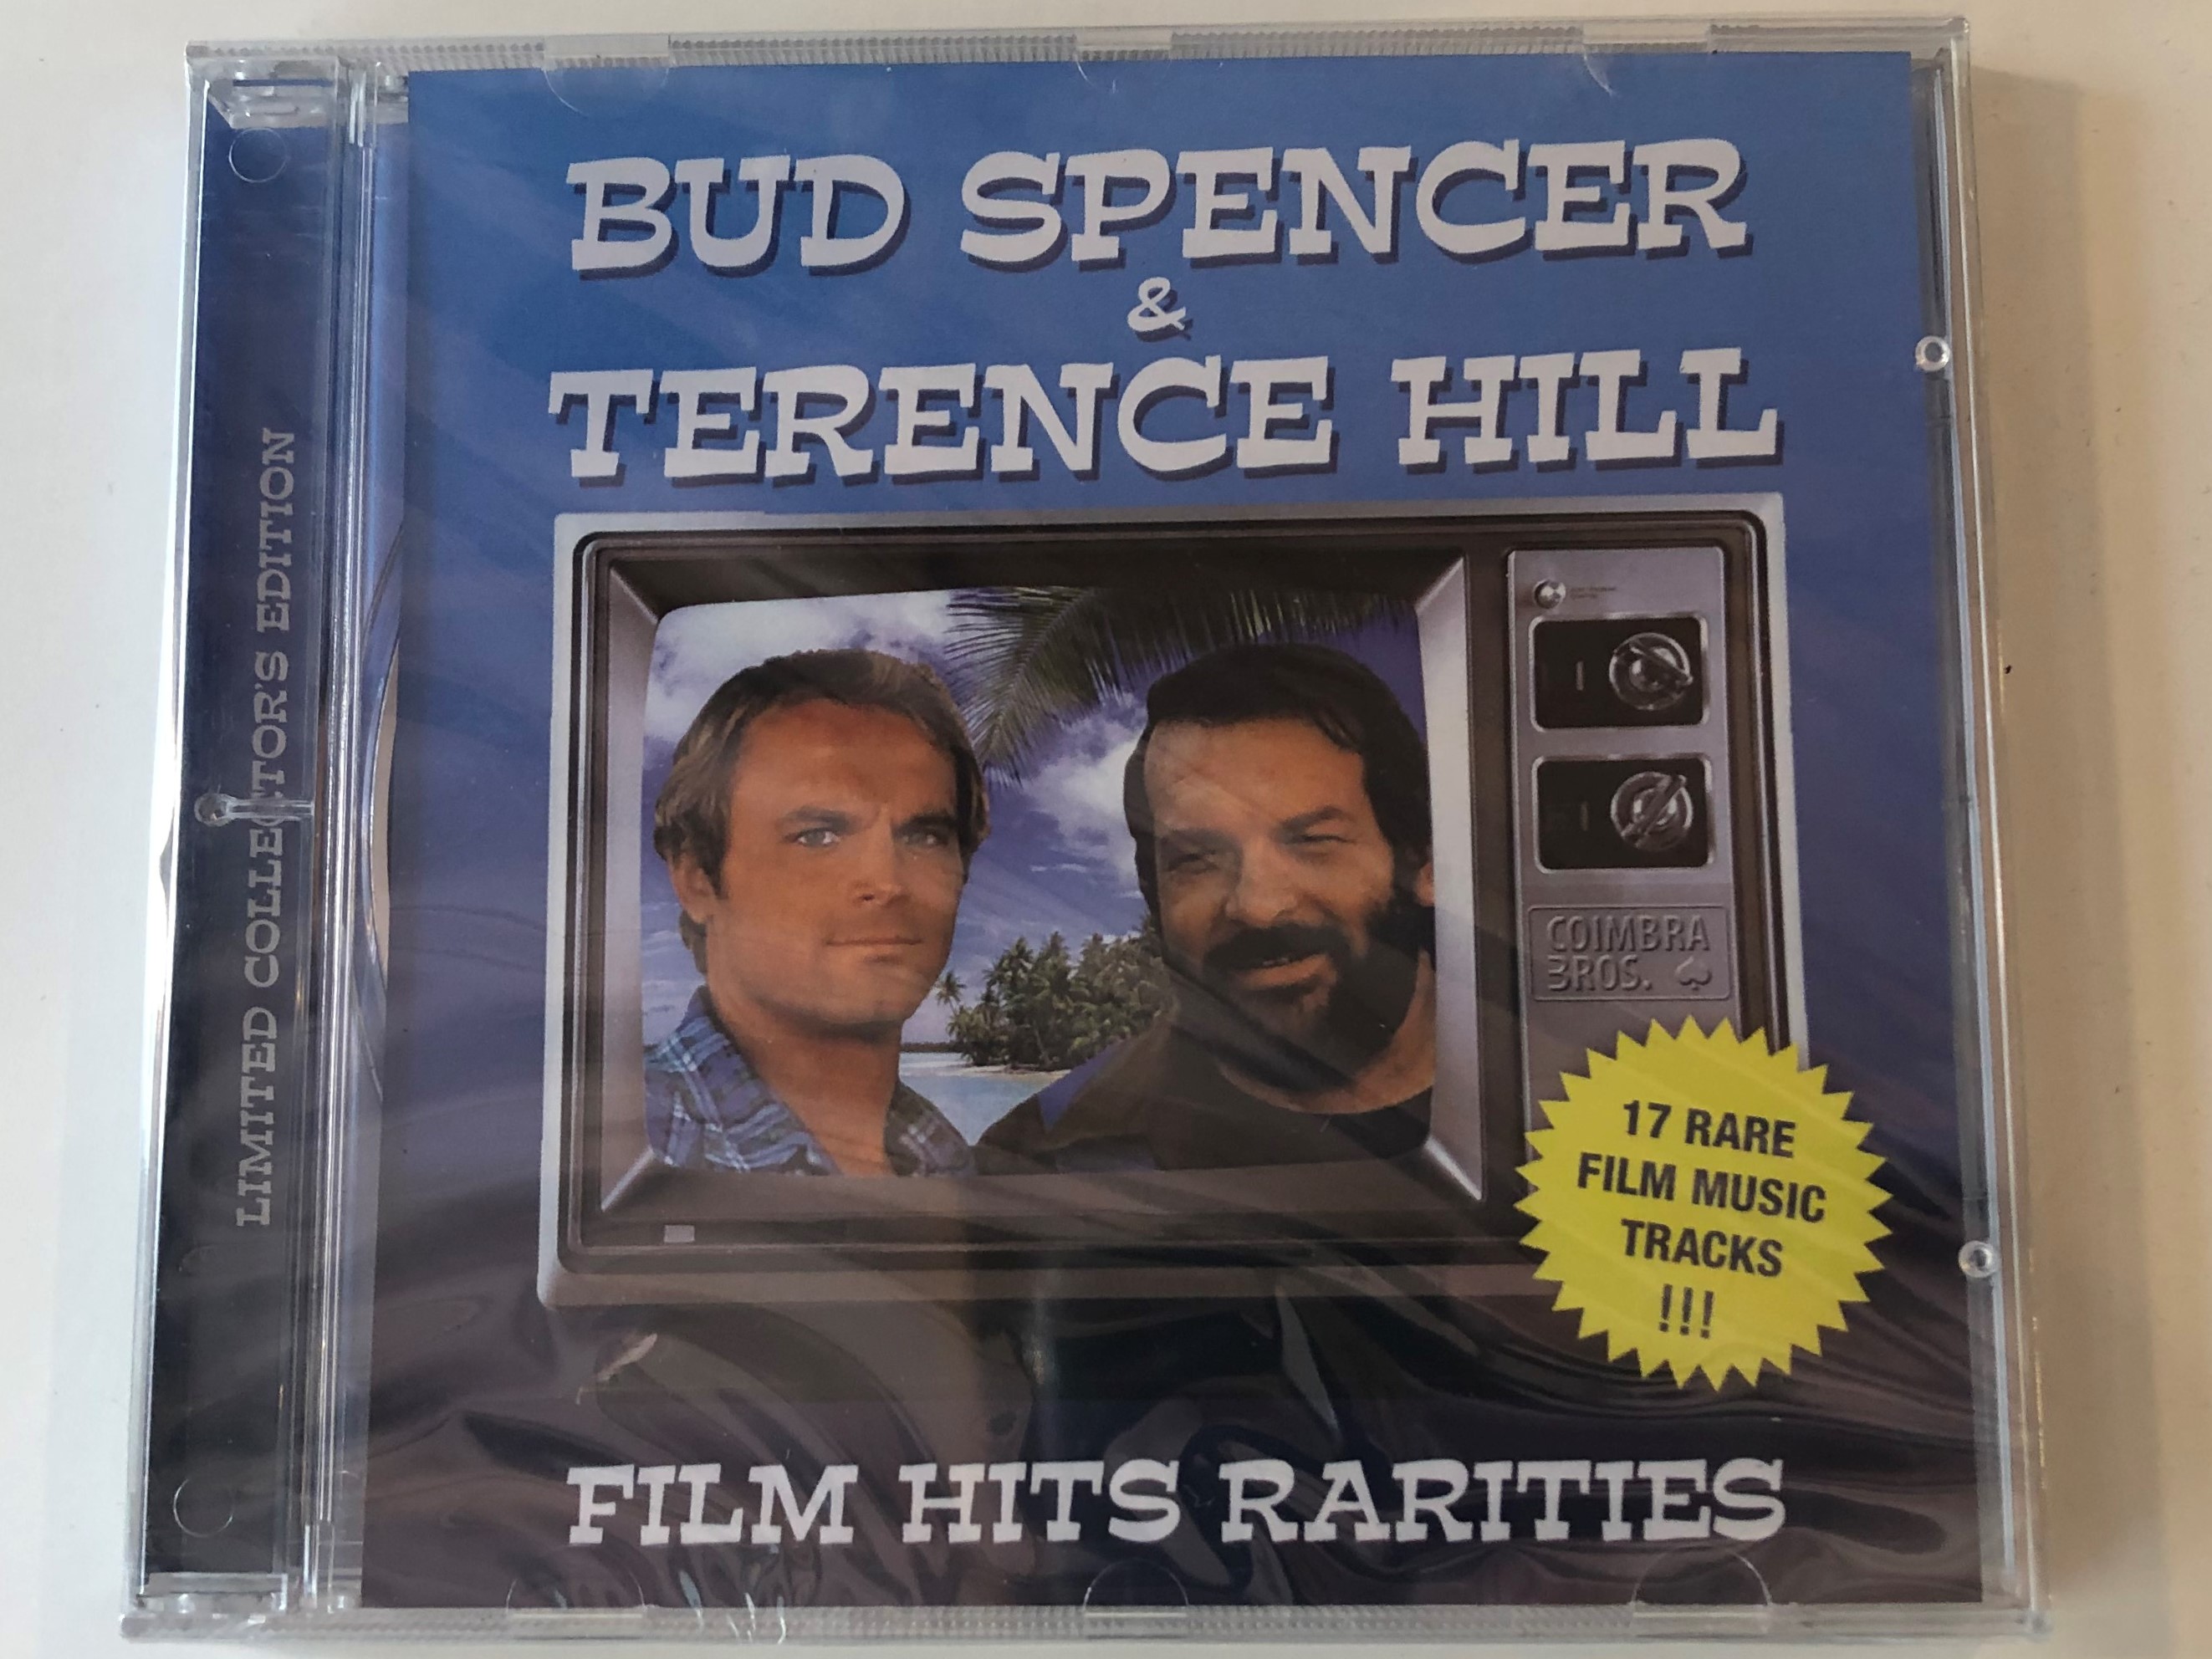 bud-spencer-terence-hill-film-hits-rarities-limited-collectors-edition-17-rare-film-music-tracks-hargent-media-audio-cd-5999883601426-1-.jpg